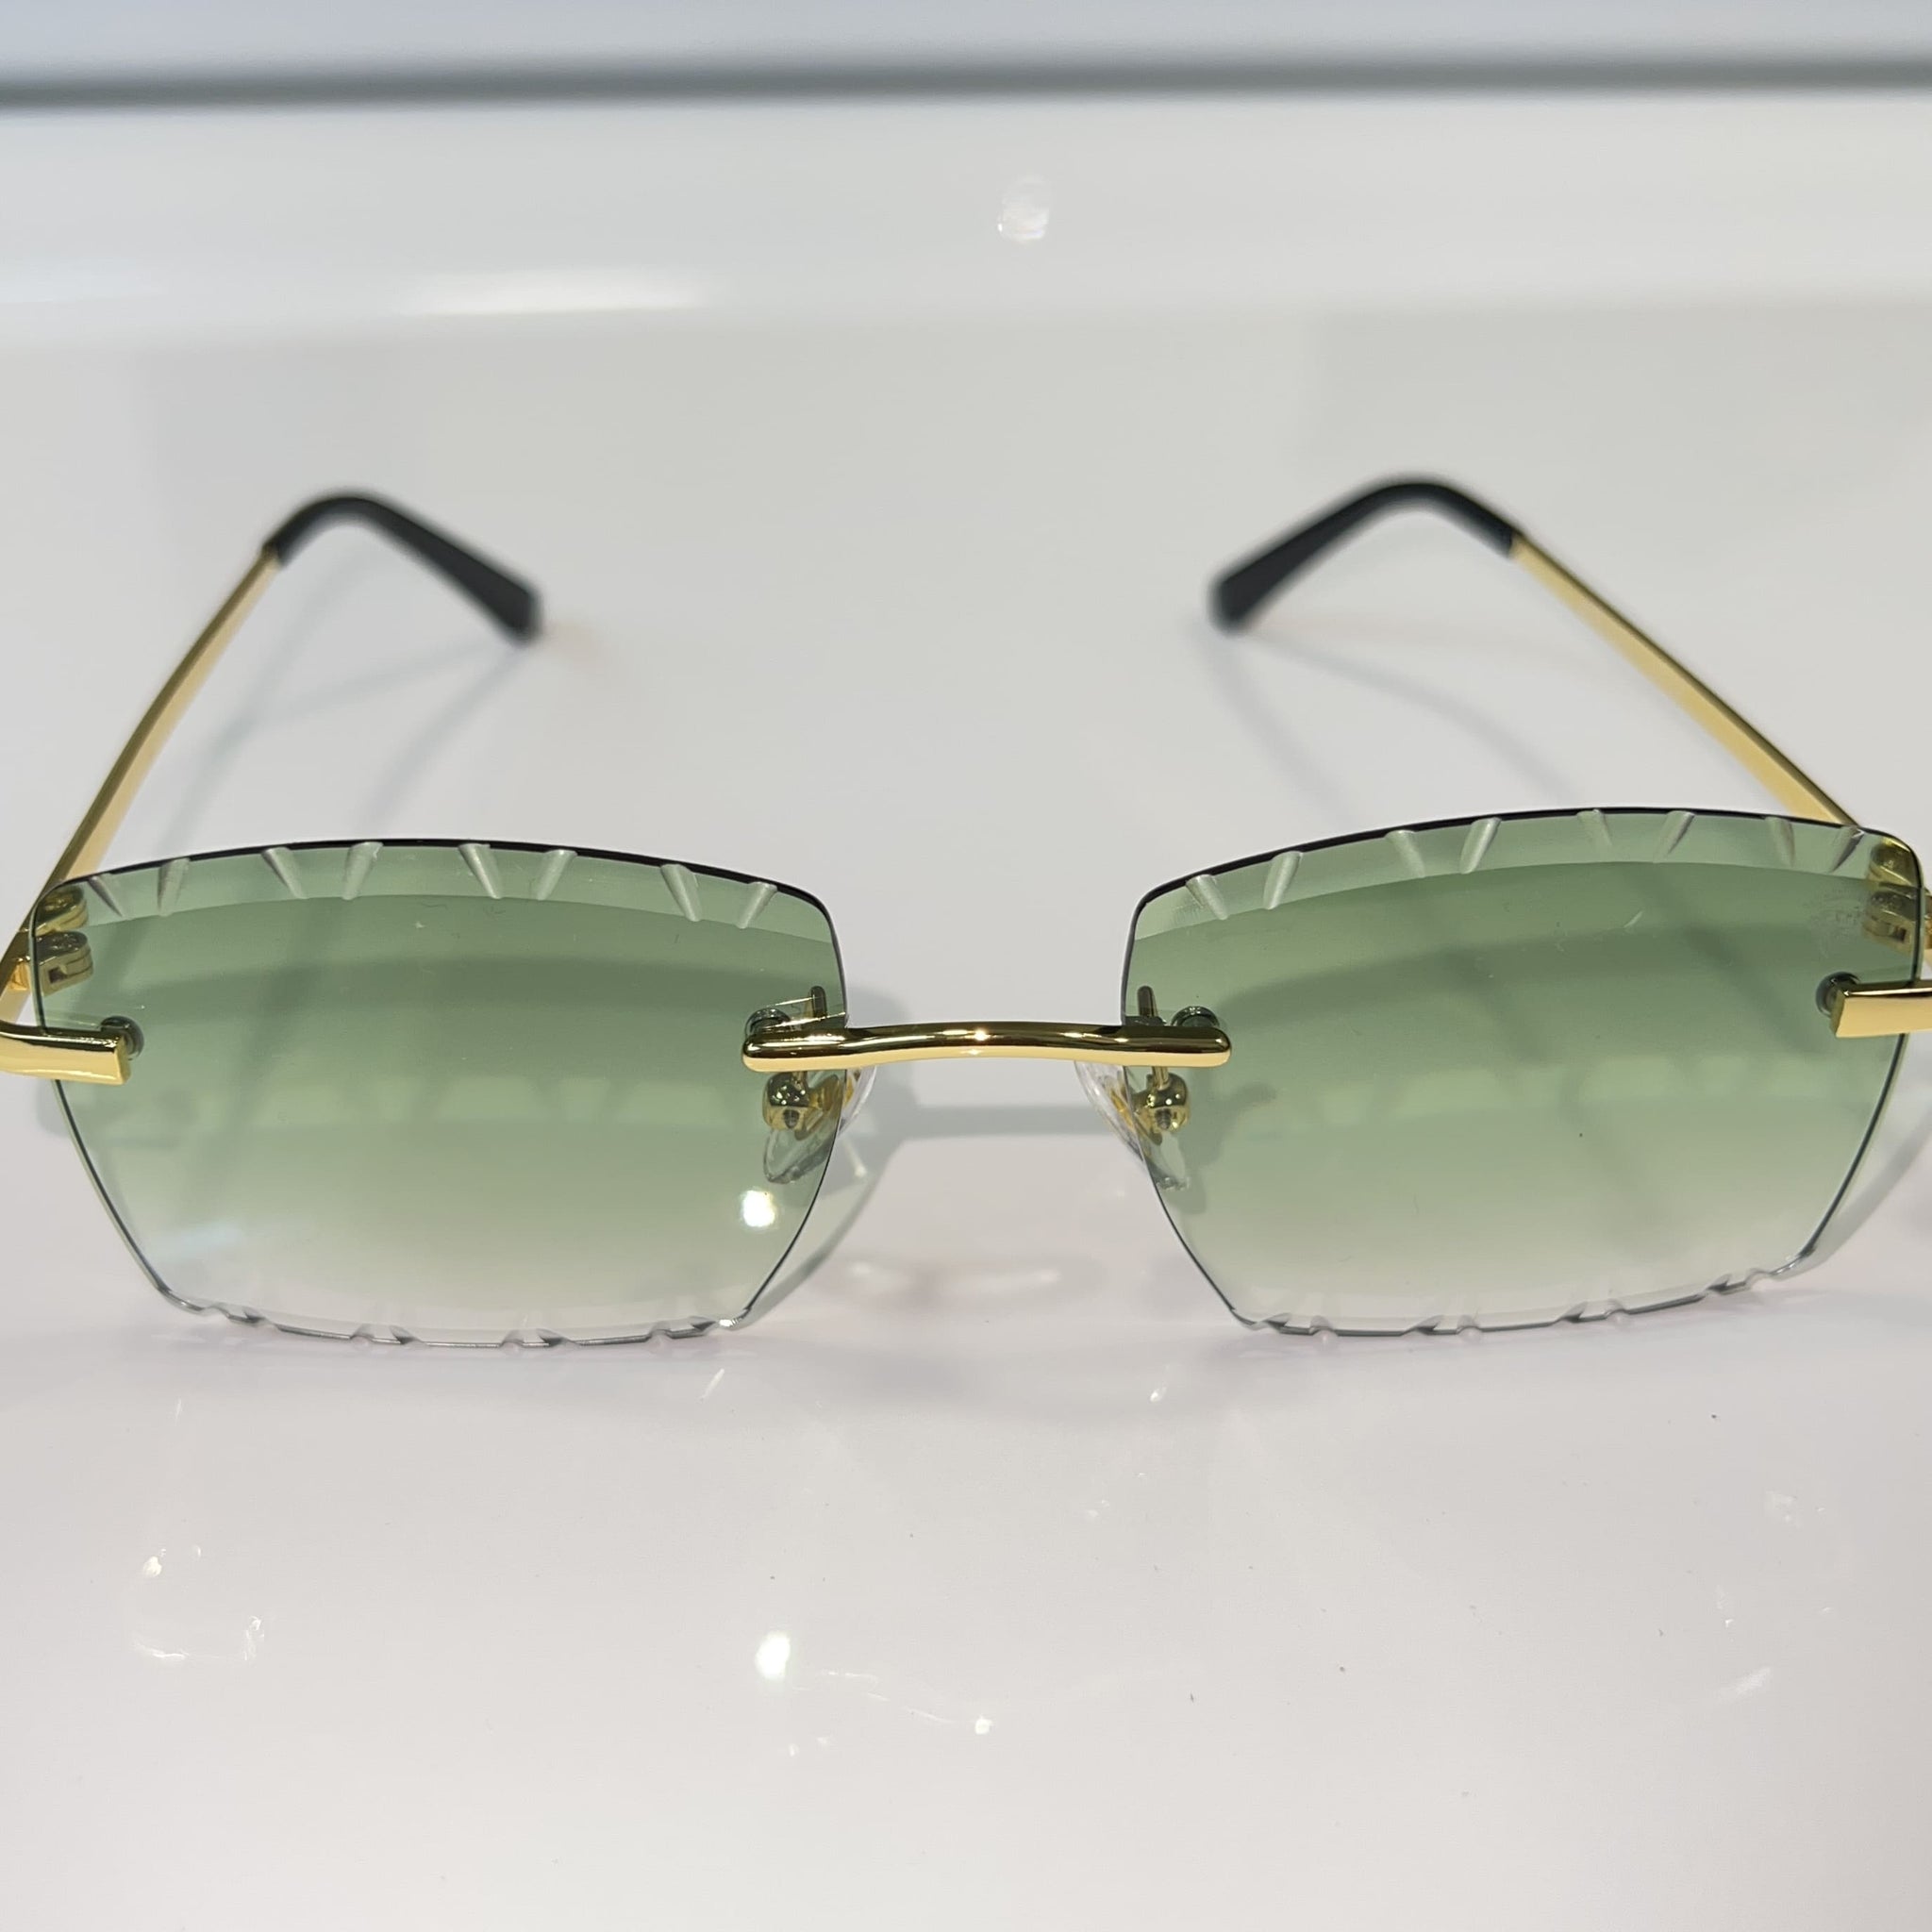 Dripcut Glasses - 14k gold plated - Green Shade - Sehgal Glasses